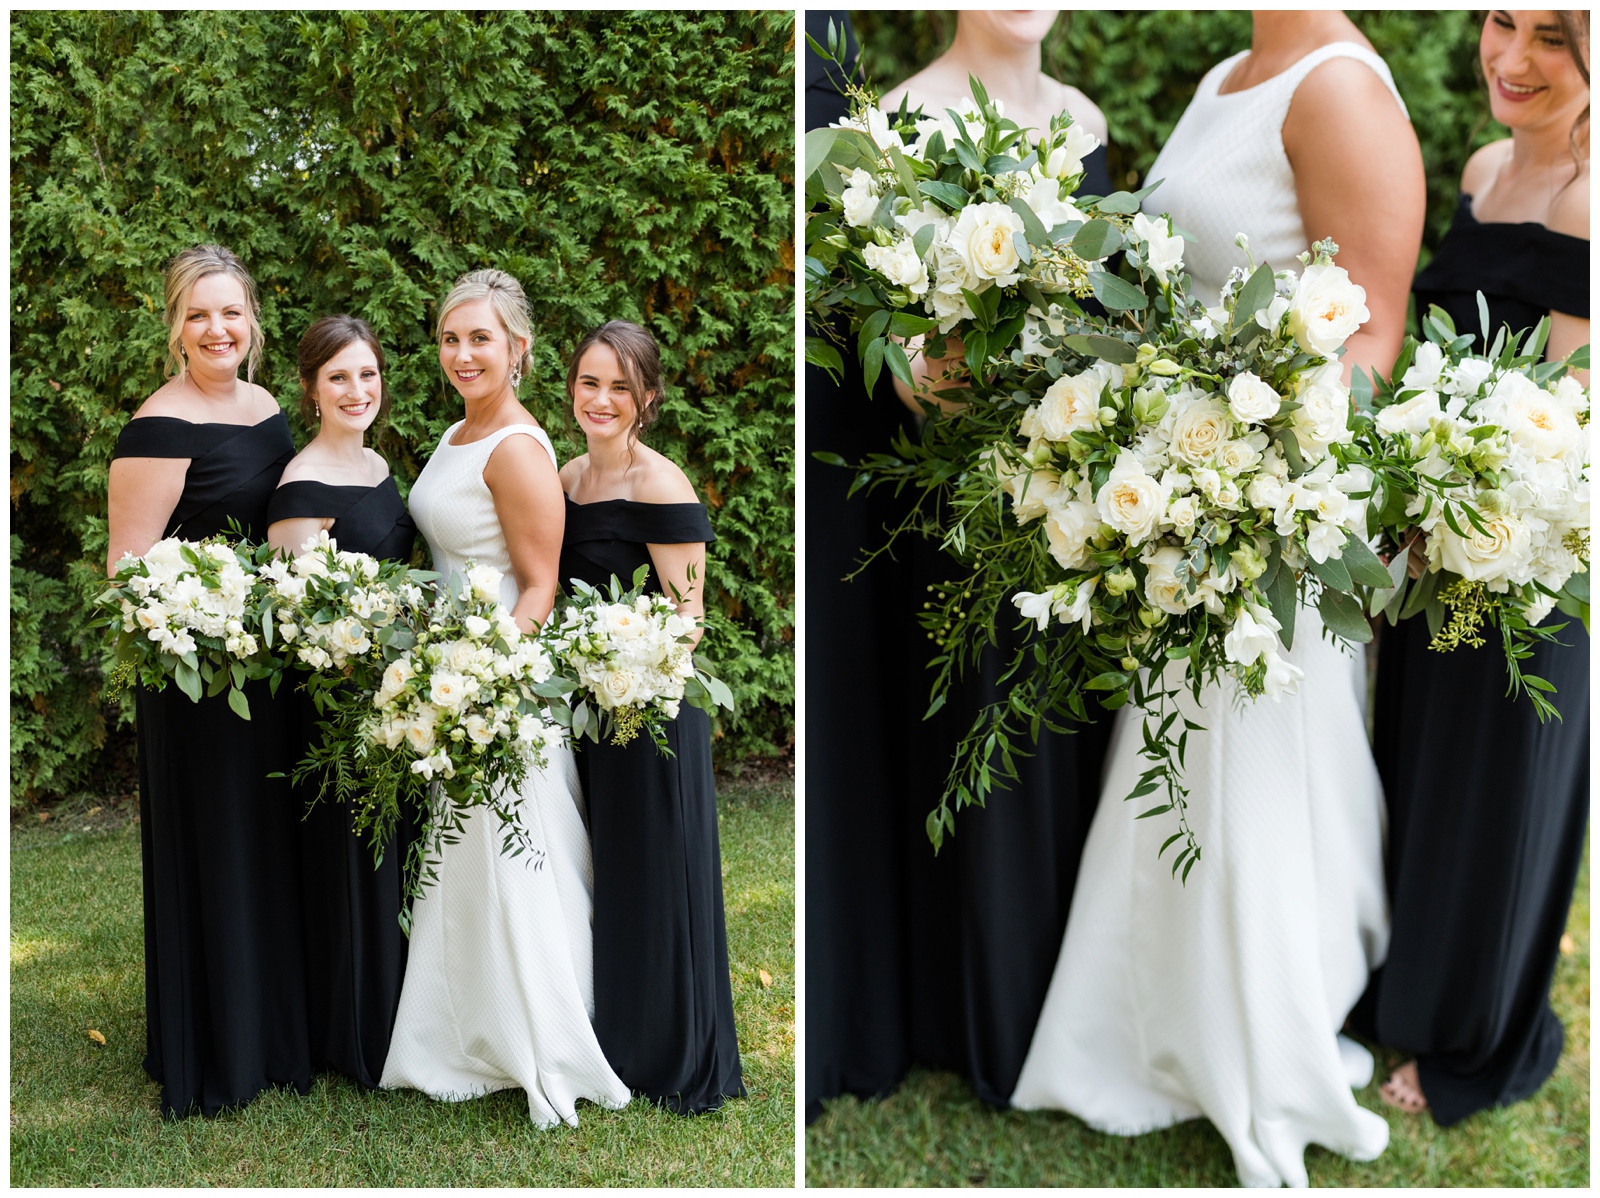 bride and bridesmaids in black gowns hold elegant white bouquets by The English Garden